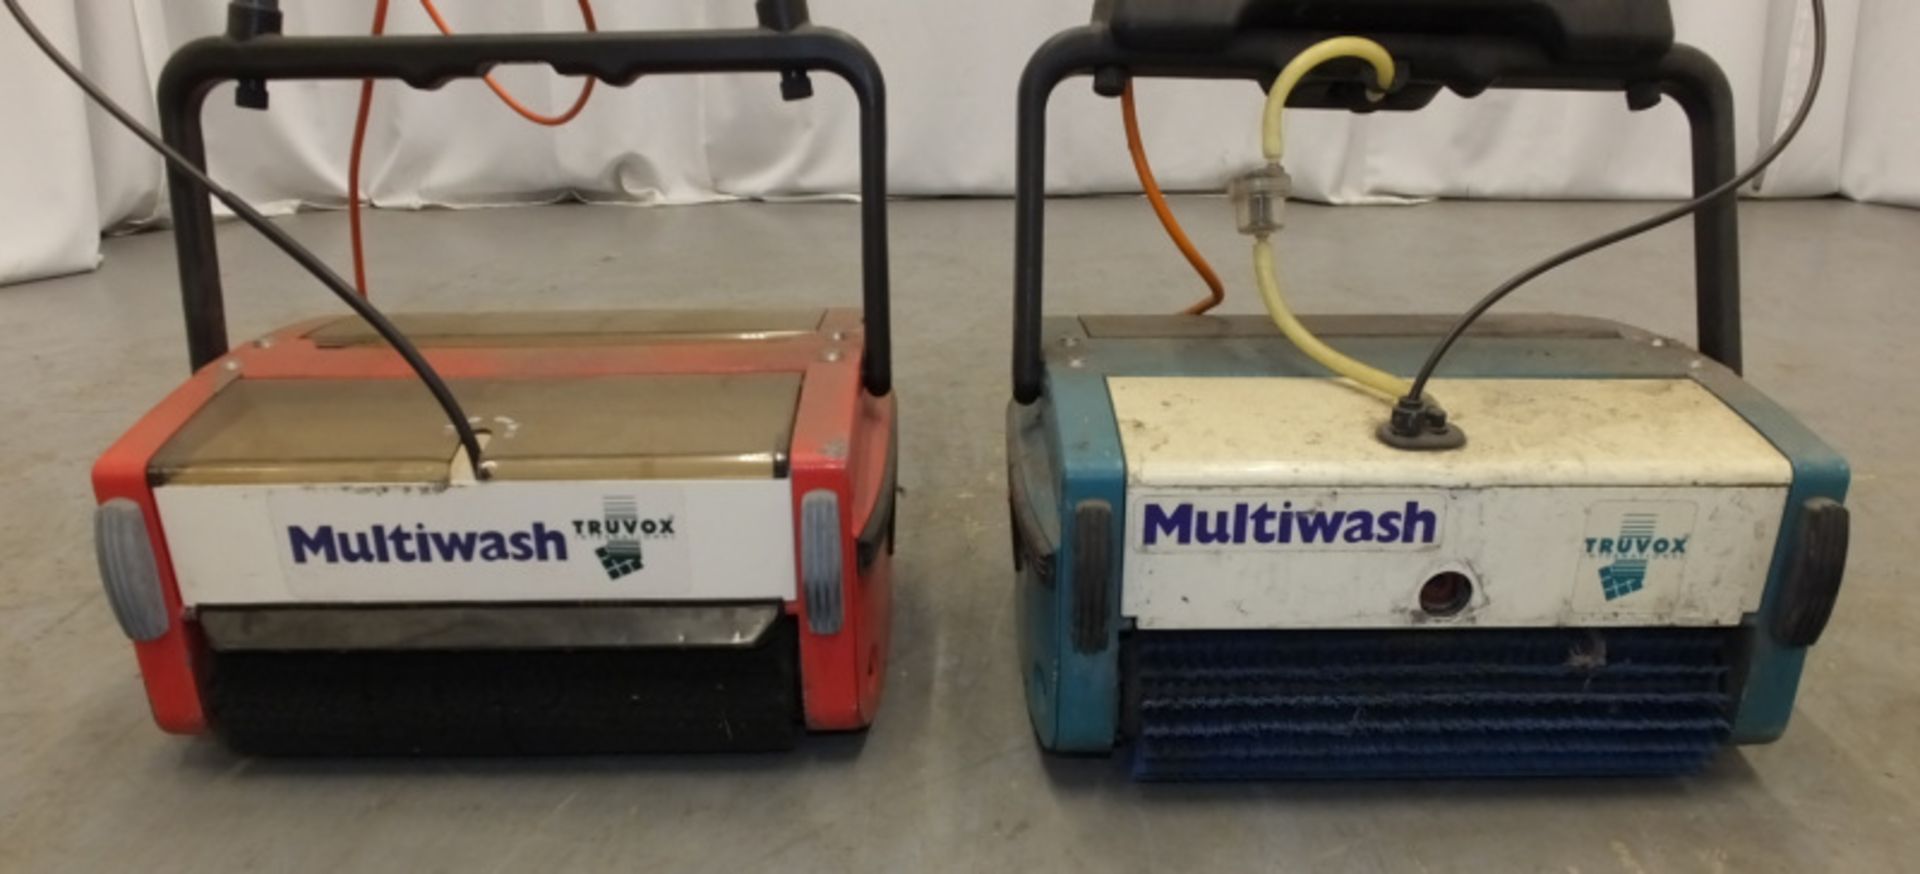 2 x Truvox Multiwash Scrubber Dryers - MW340/ICE and MW340/PUMP - both units power up - Image 2 of 4